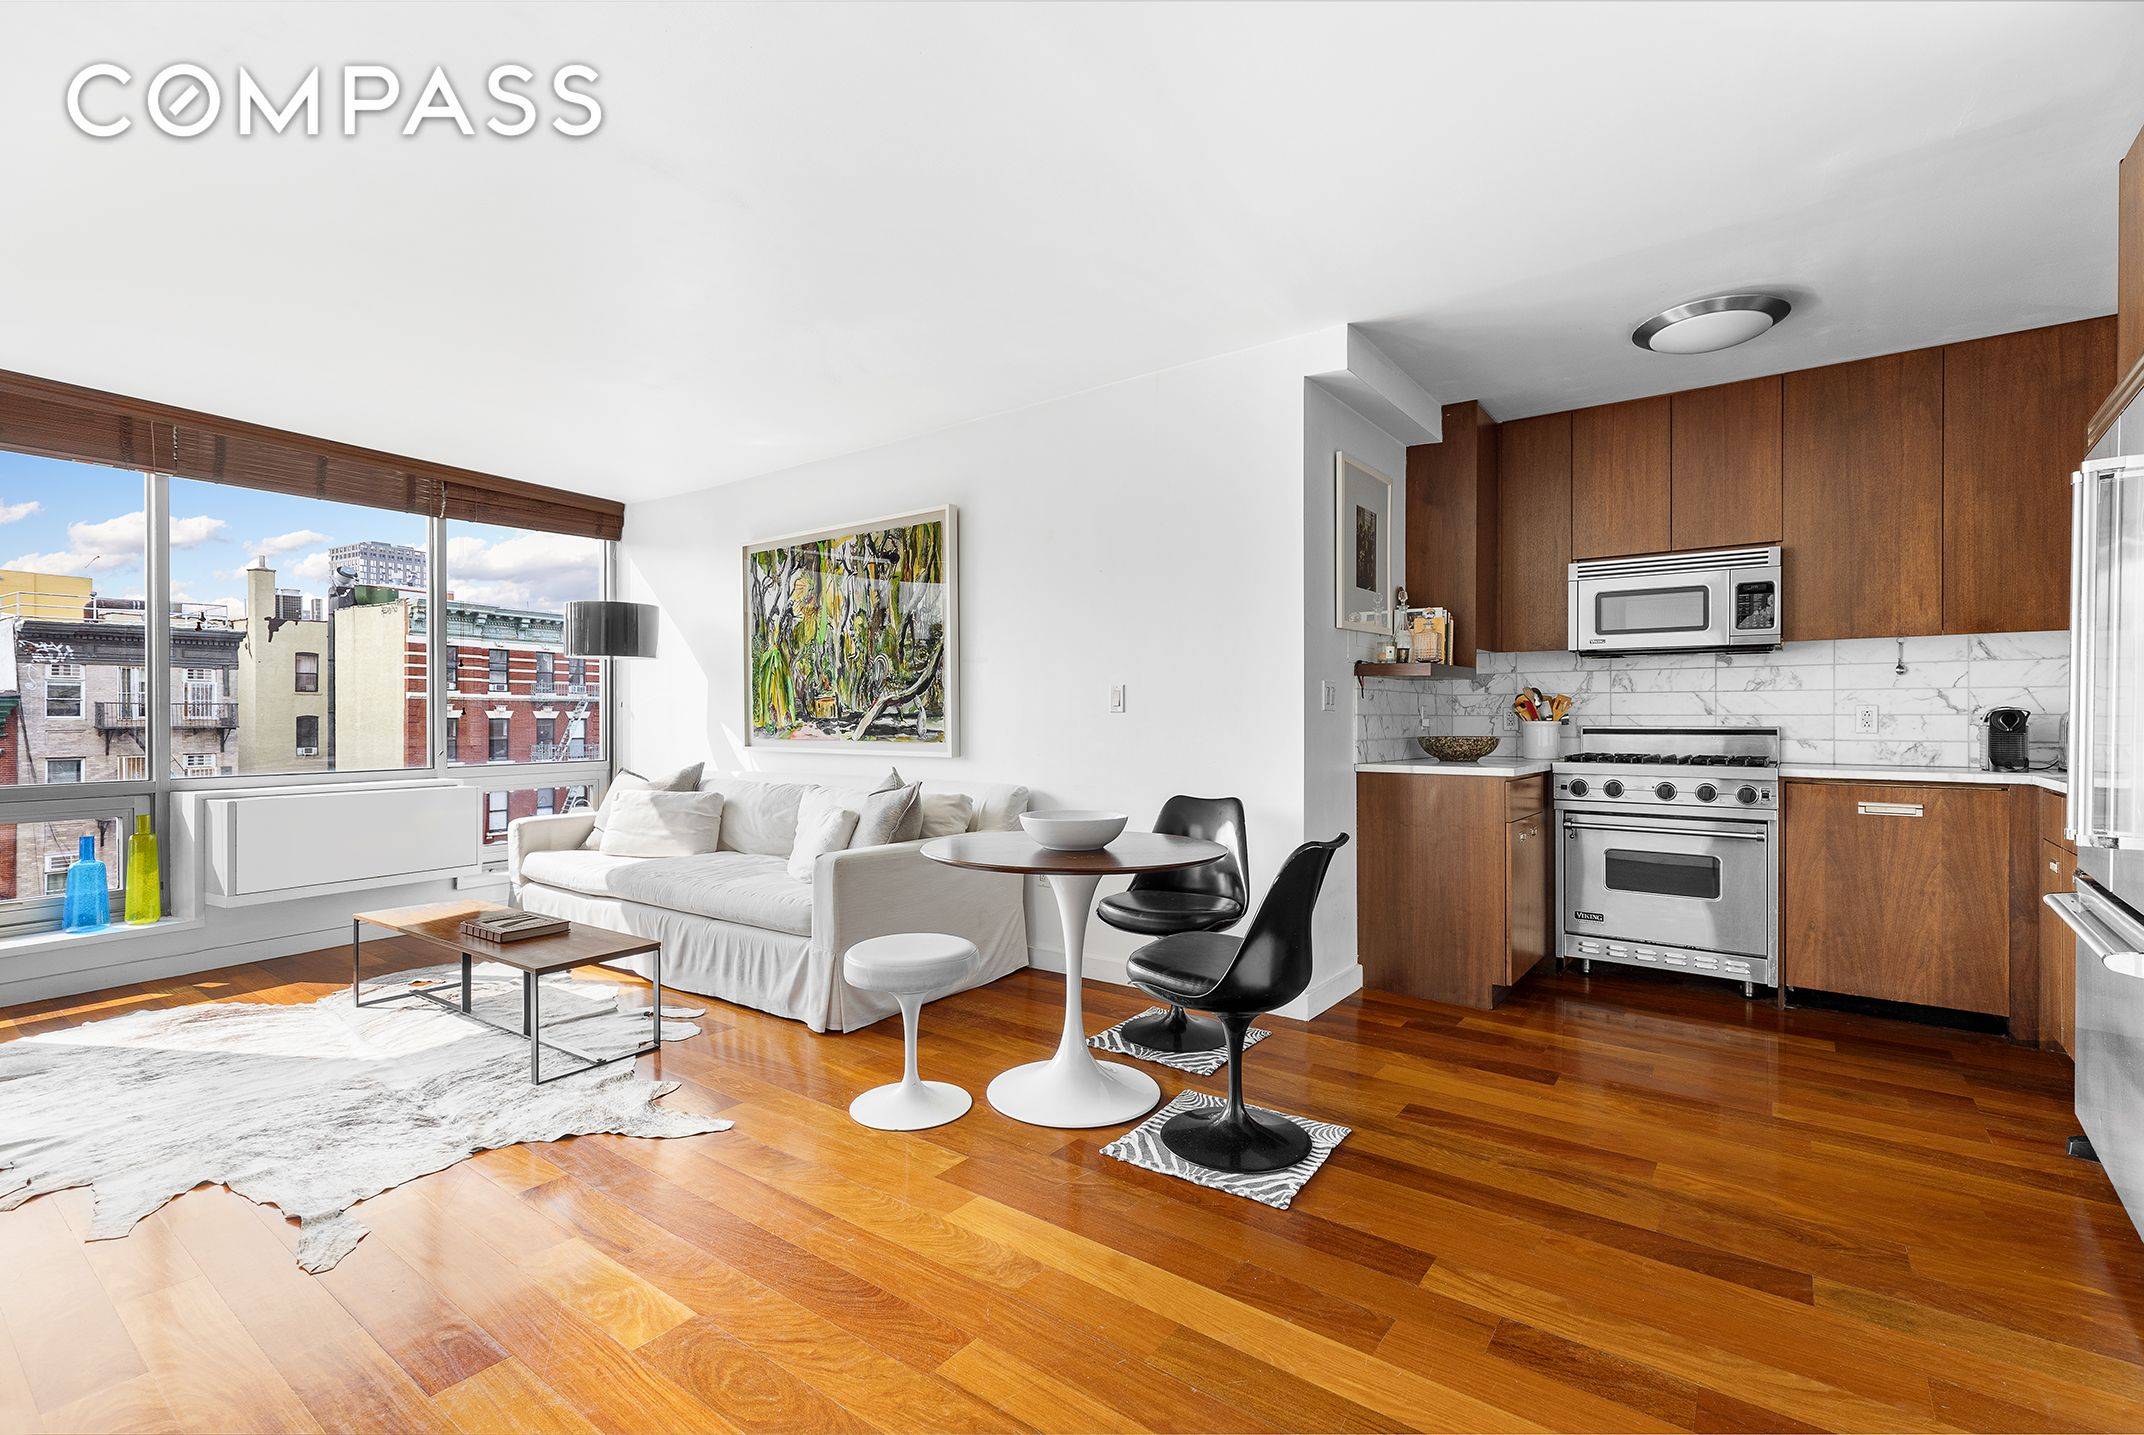 At the crossroads of the East Village and Lower East Side, this mint condition condominium one bedroom penthouse provides a unique luxury living space in a coveted downtown location !